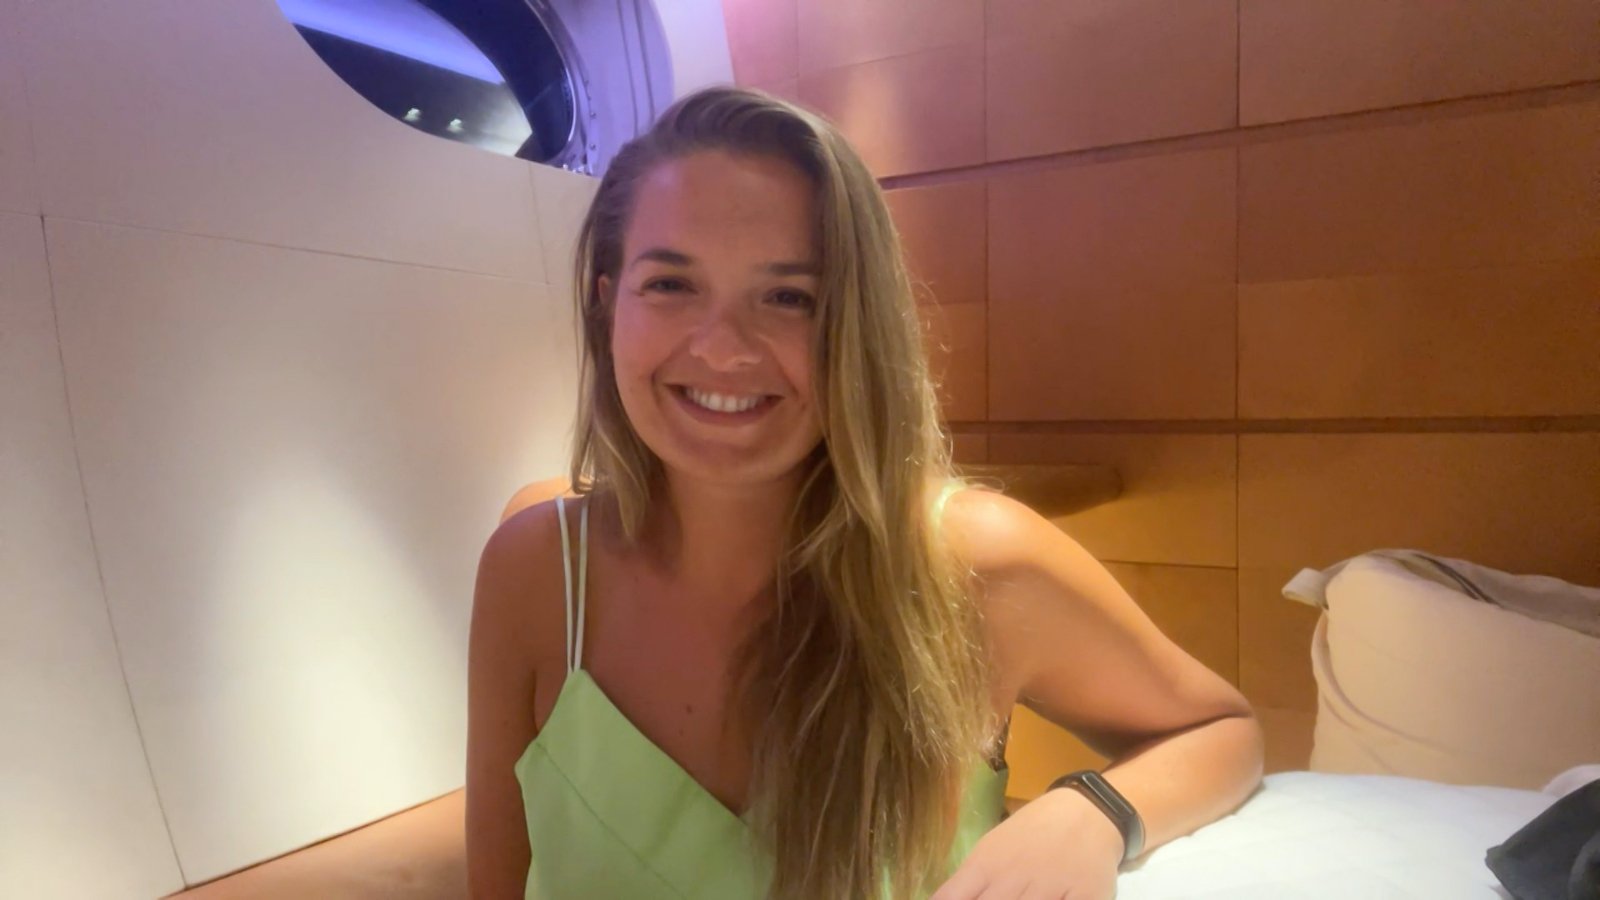 Daisy Kelliher from 'Below Deck Sailing Yacht' appeared on WWHL from the boat she was working on